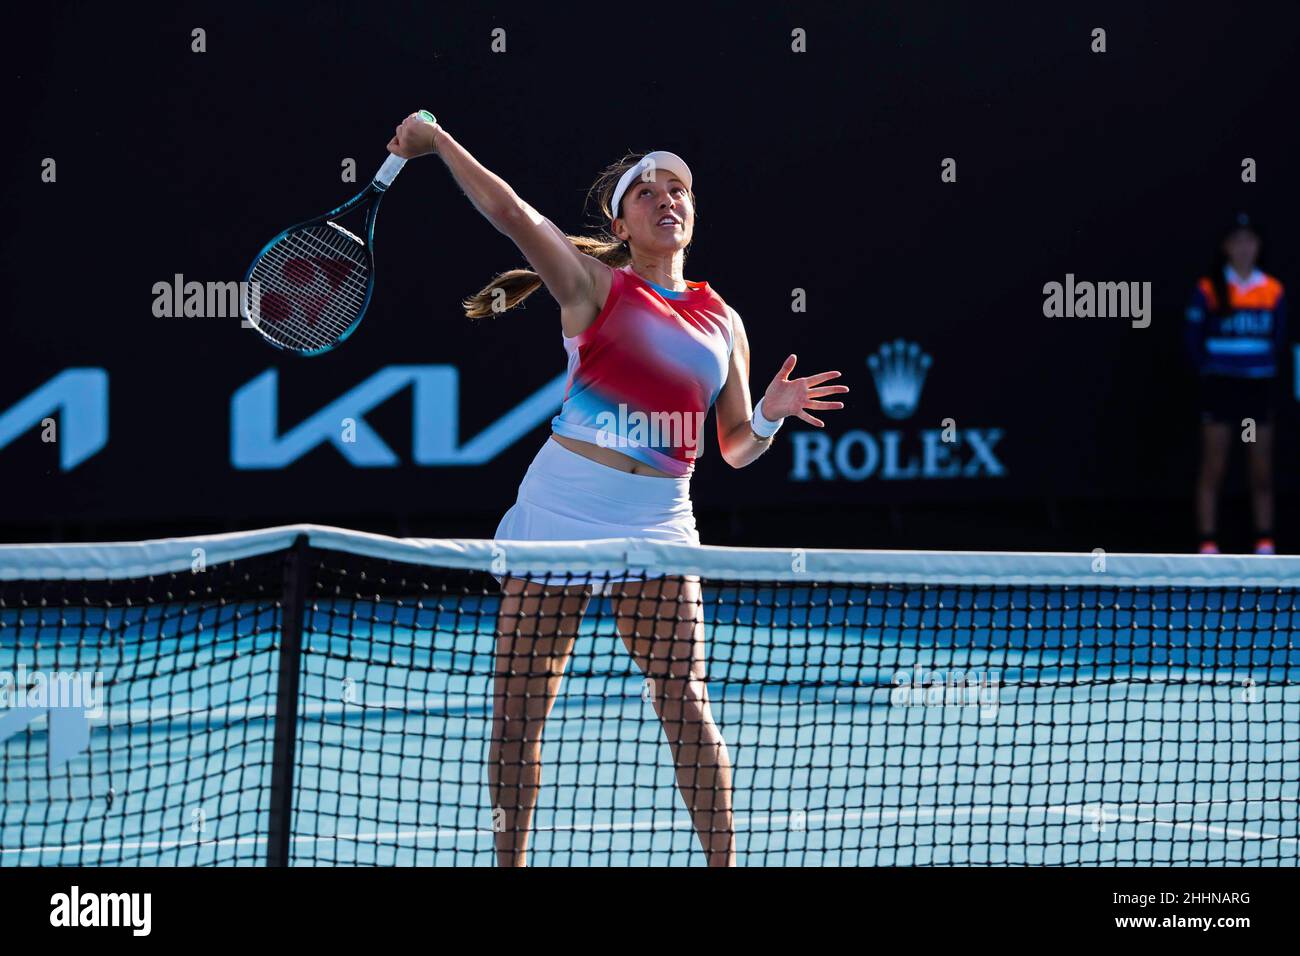 American Jessica Pegula in action during the Australian Open 2022 Round 1 match of the Grand Slam against Ukrainian Anhelina Kalinina at Court No.5 in Melbourne Olympic Park